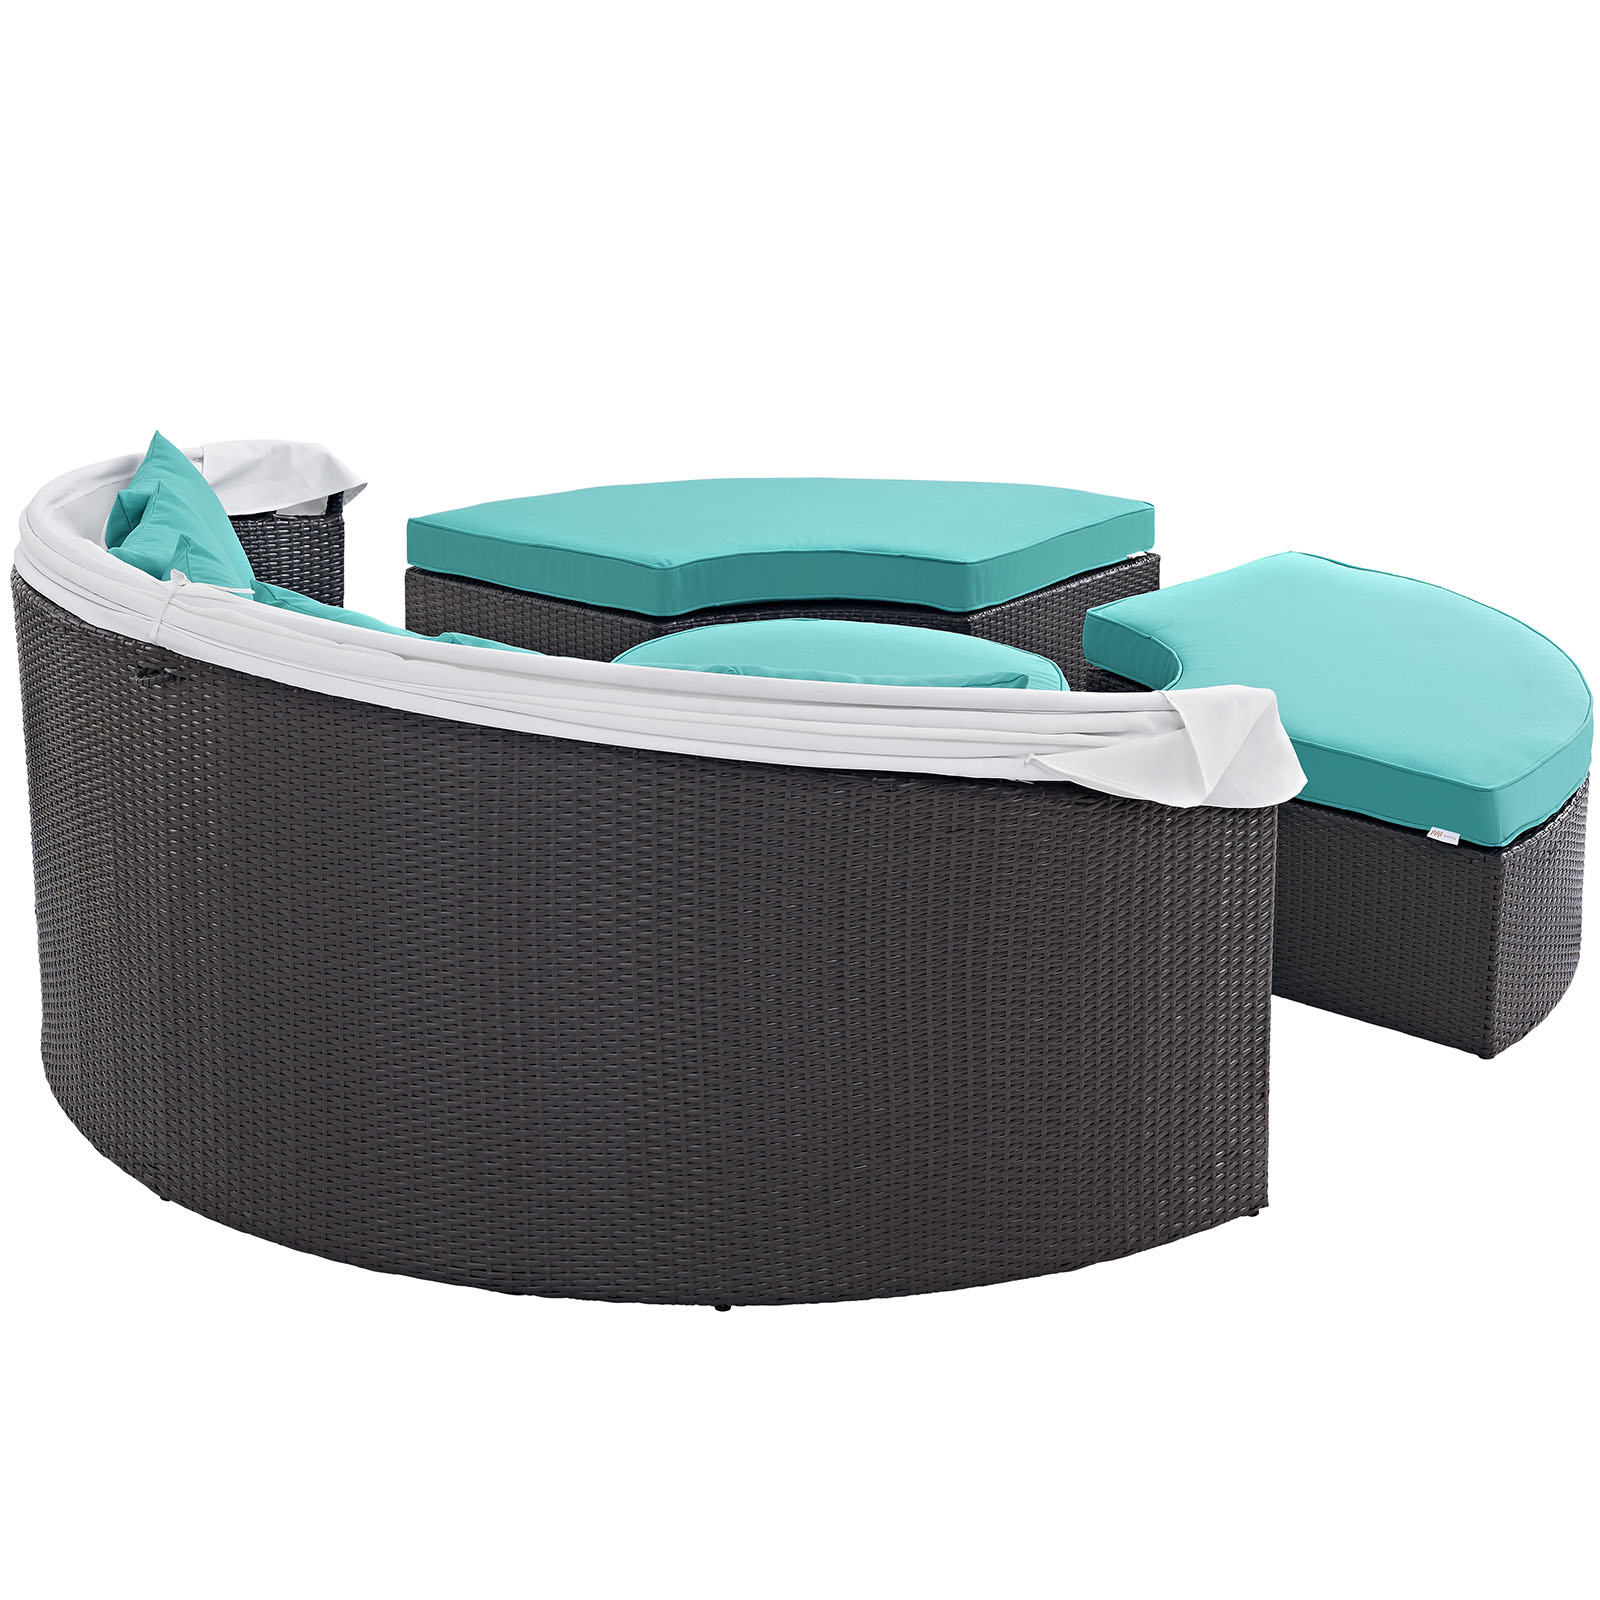 Modway Convene Canopy Outdoor Patio Daybed in Espresso Turquoise - image 5 of 6